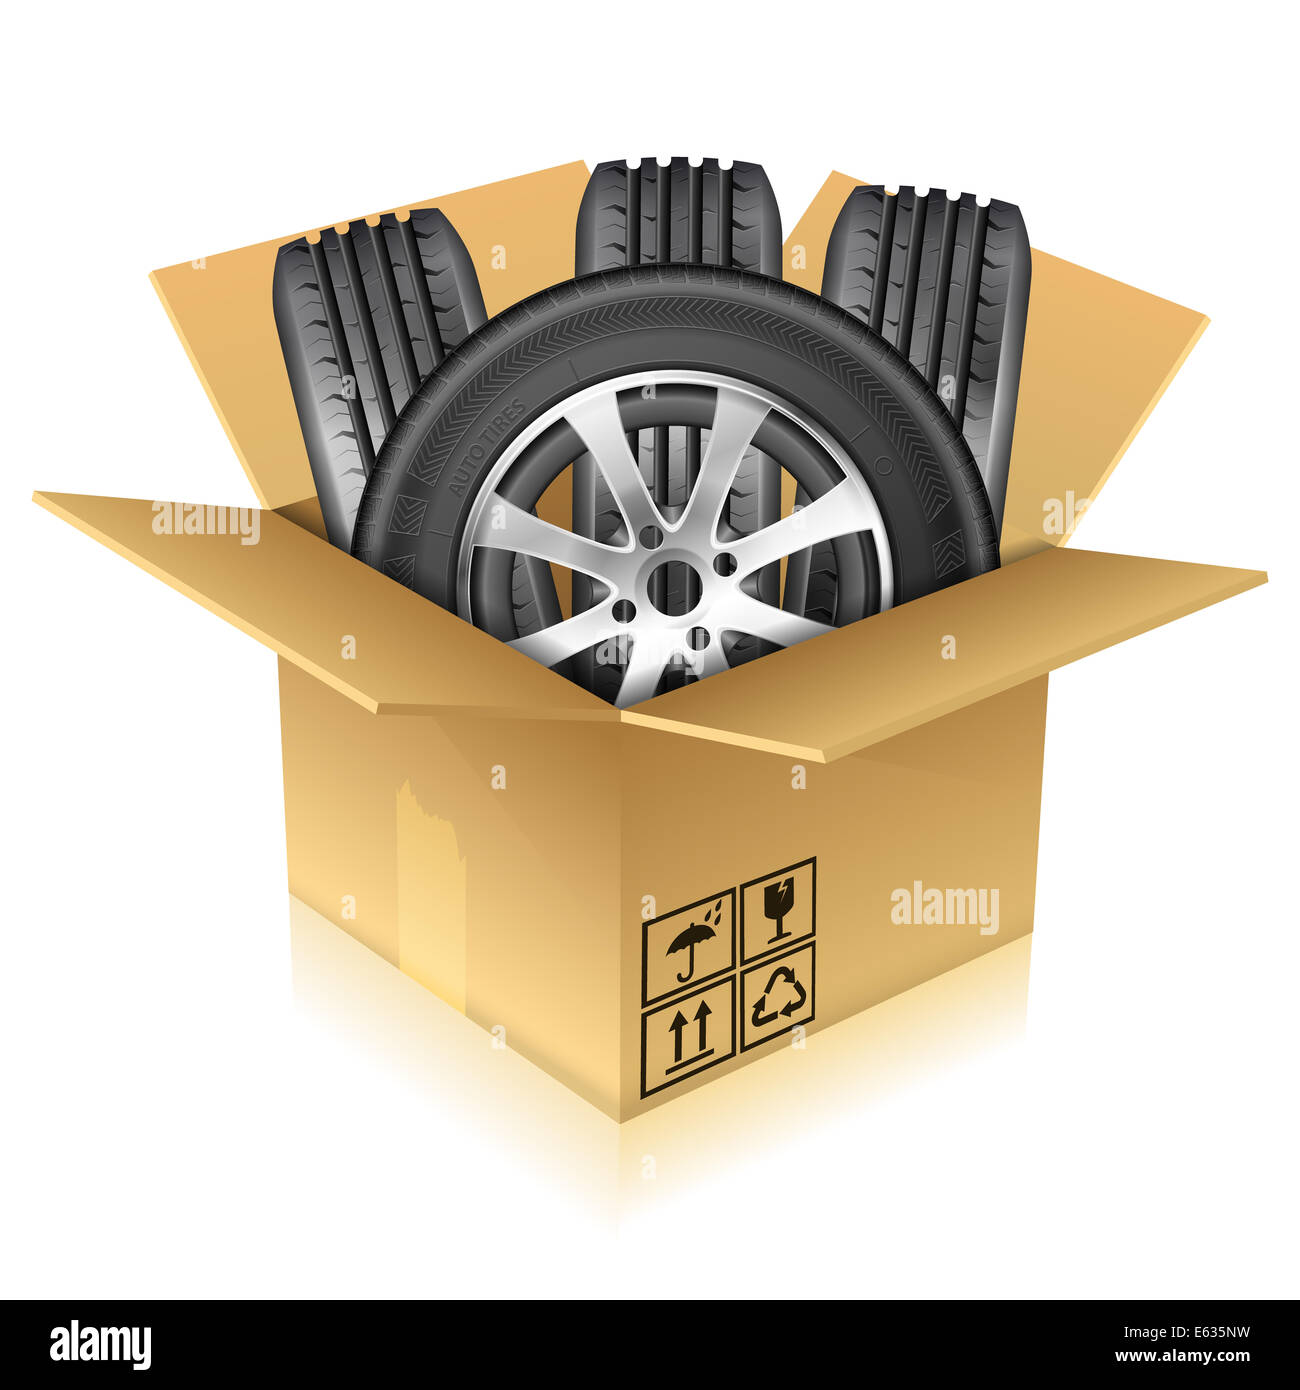 Cardboard box car Cut Out Stock Images & Pictures - Alamy